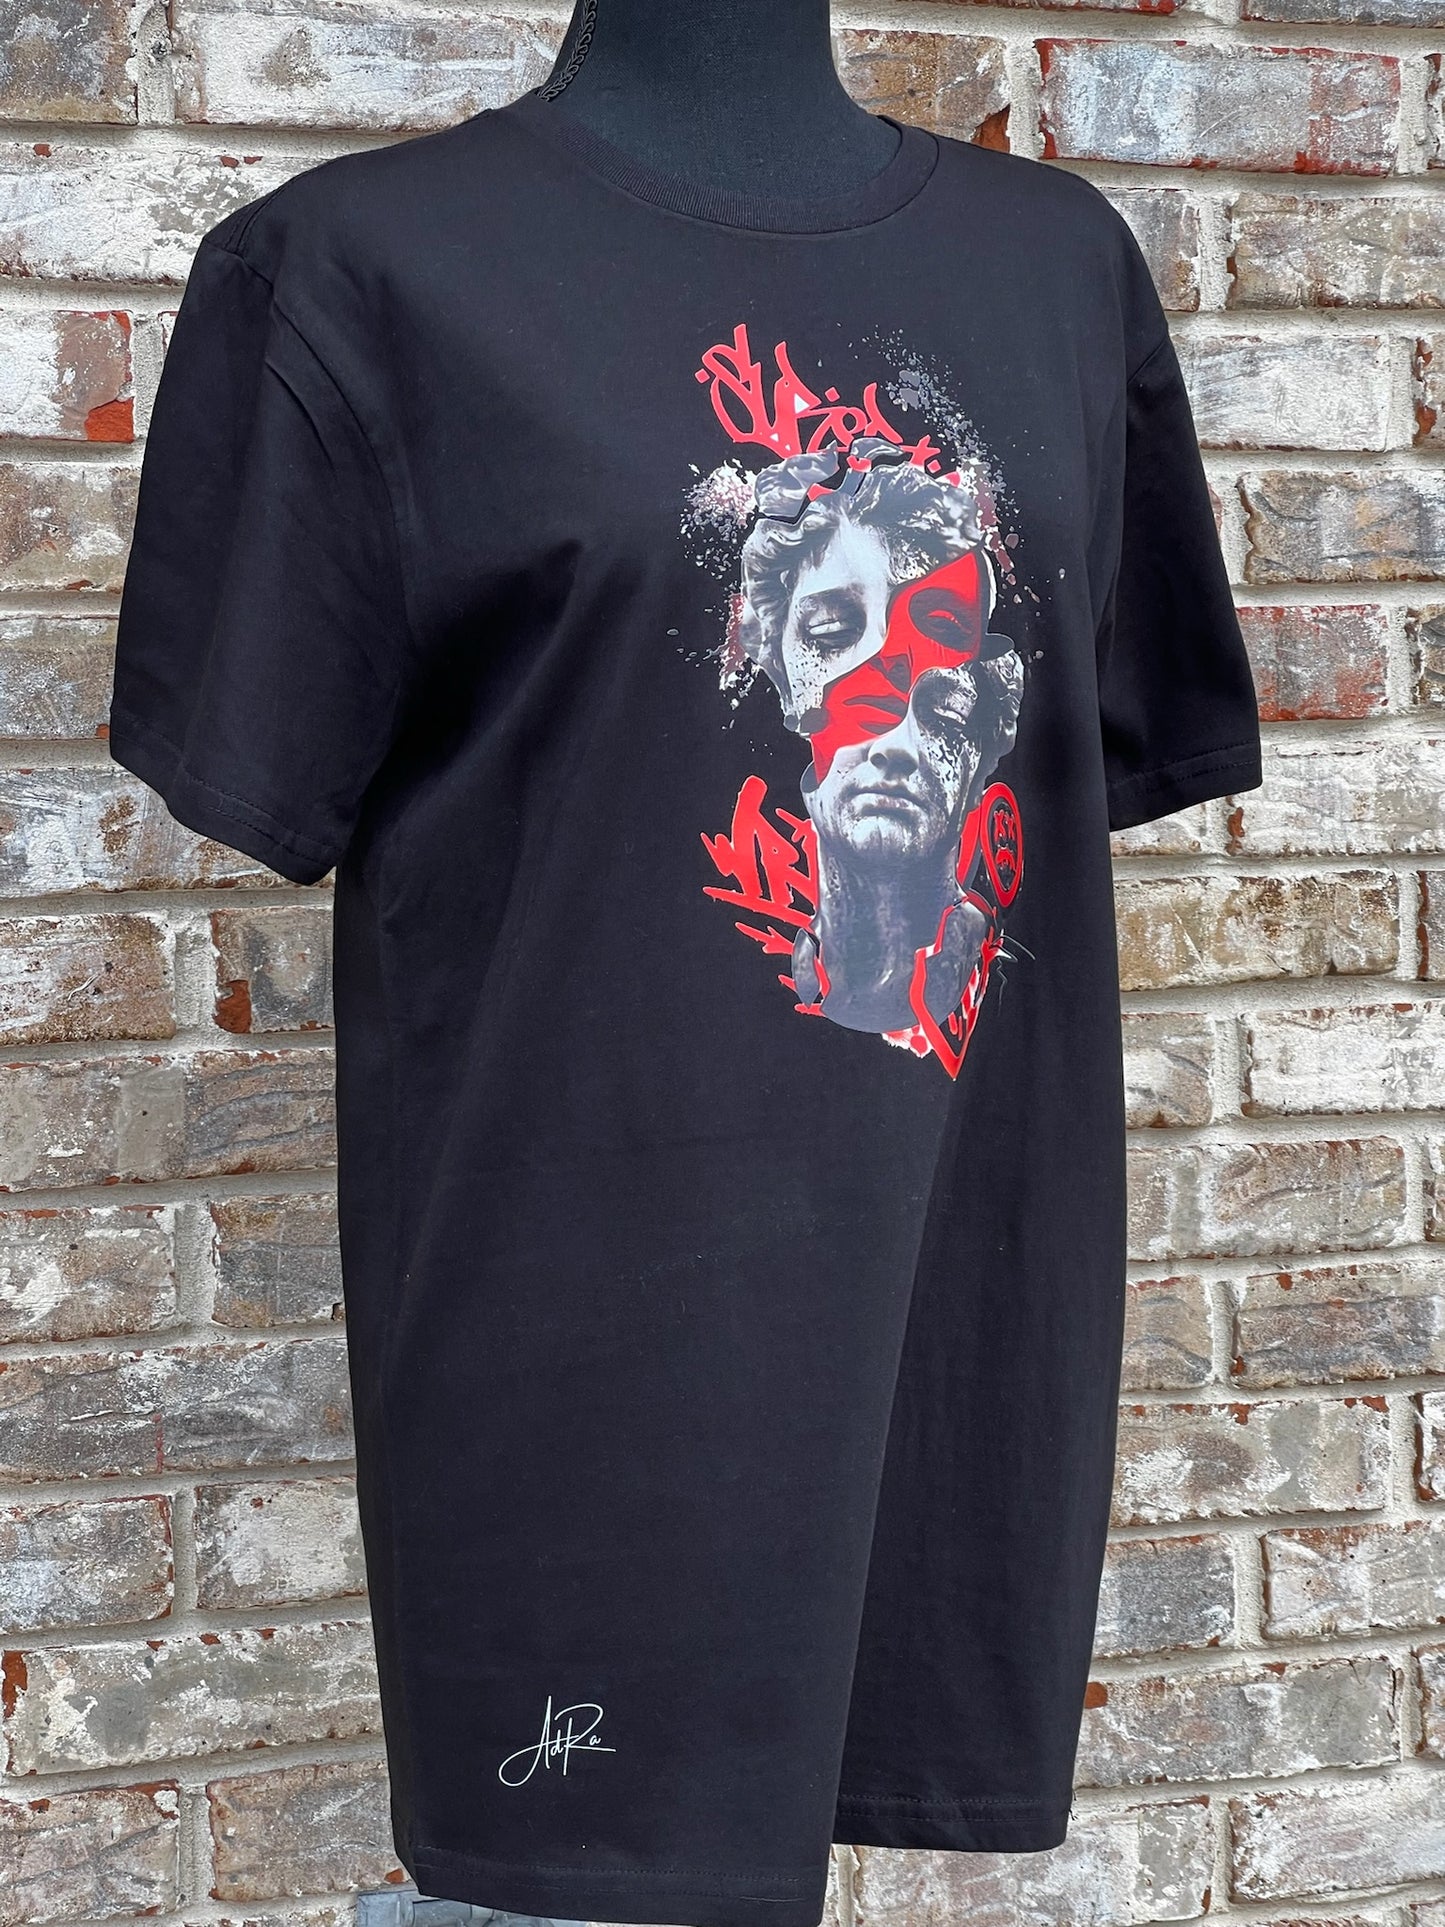 Vivid Contrast Graphic T-Shirt with Red Accents | AdRa Apparel